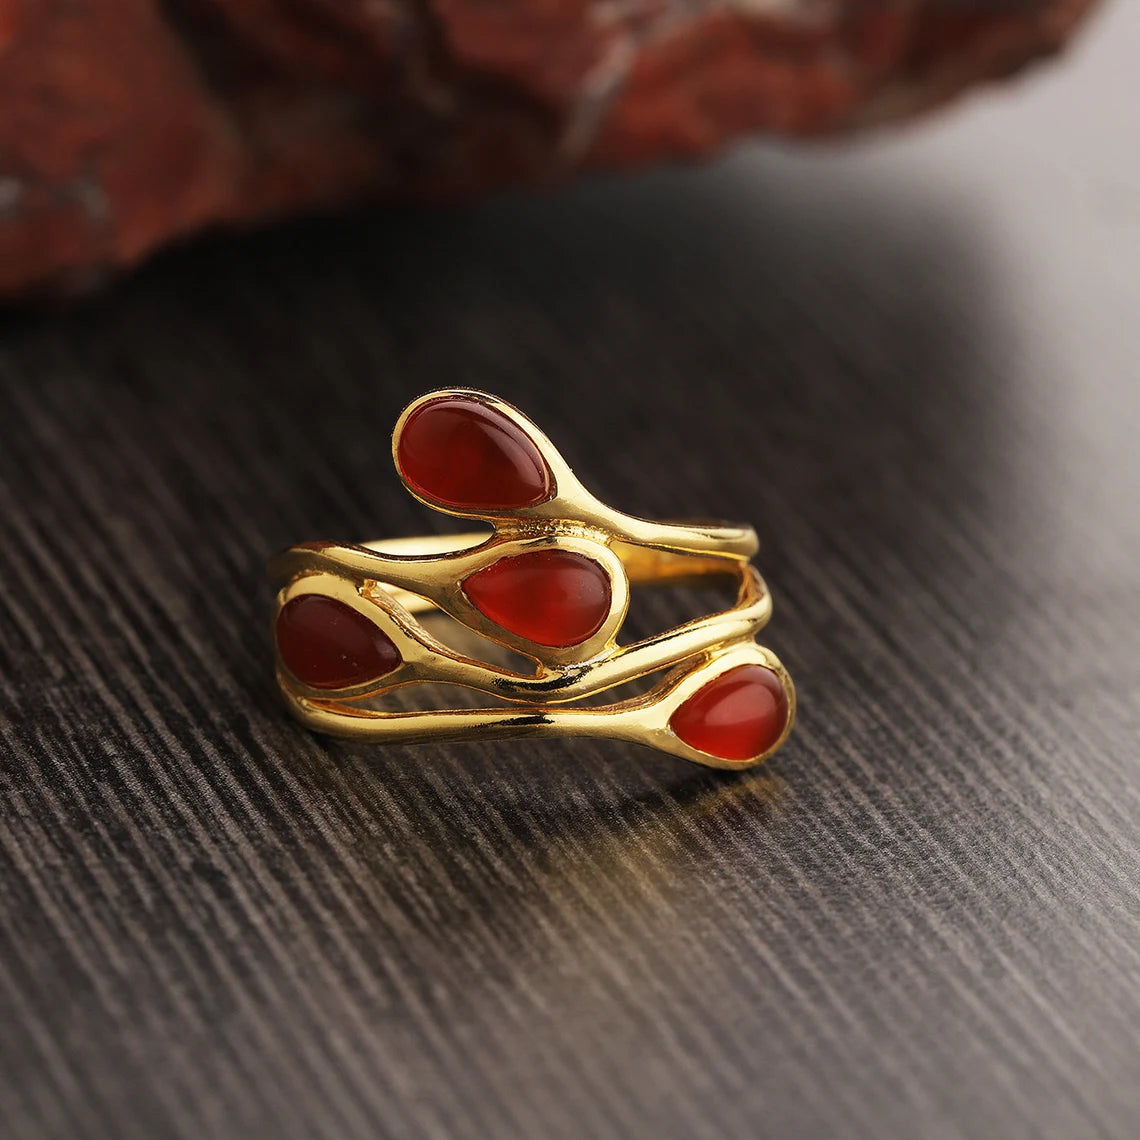 Carnelian - Amethyst - 925 Sterling Silver Gold Plated Ring